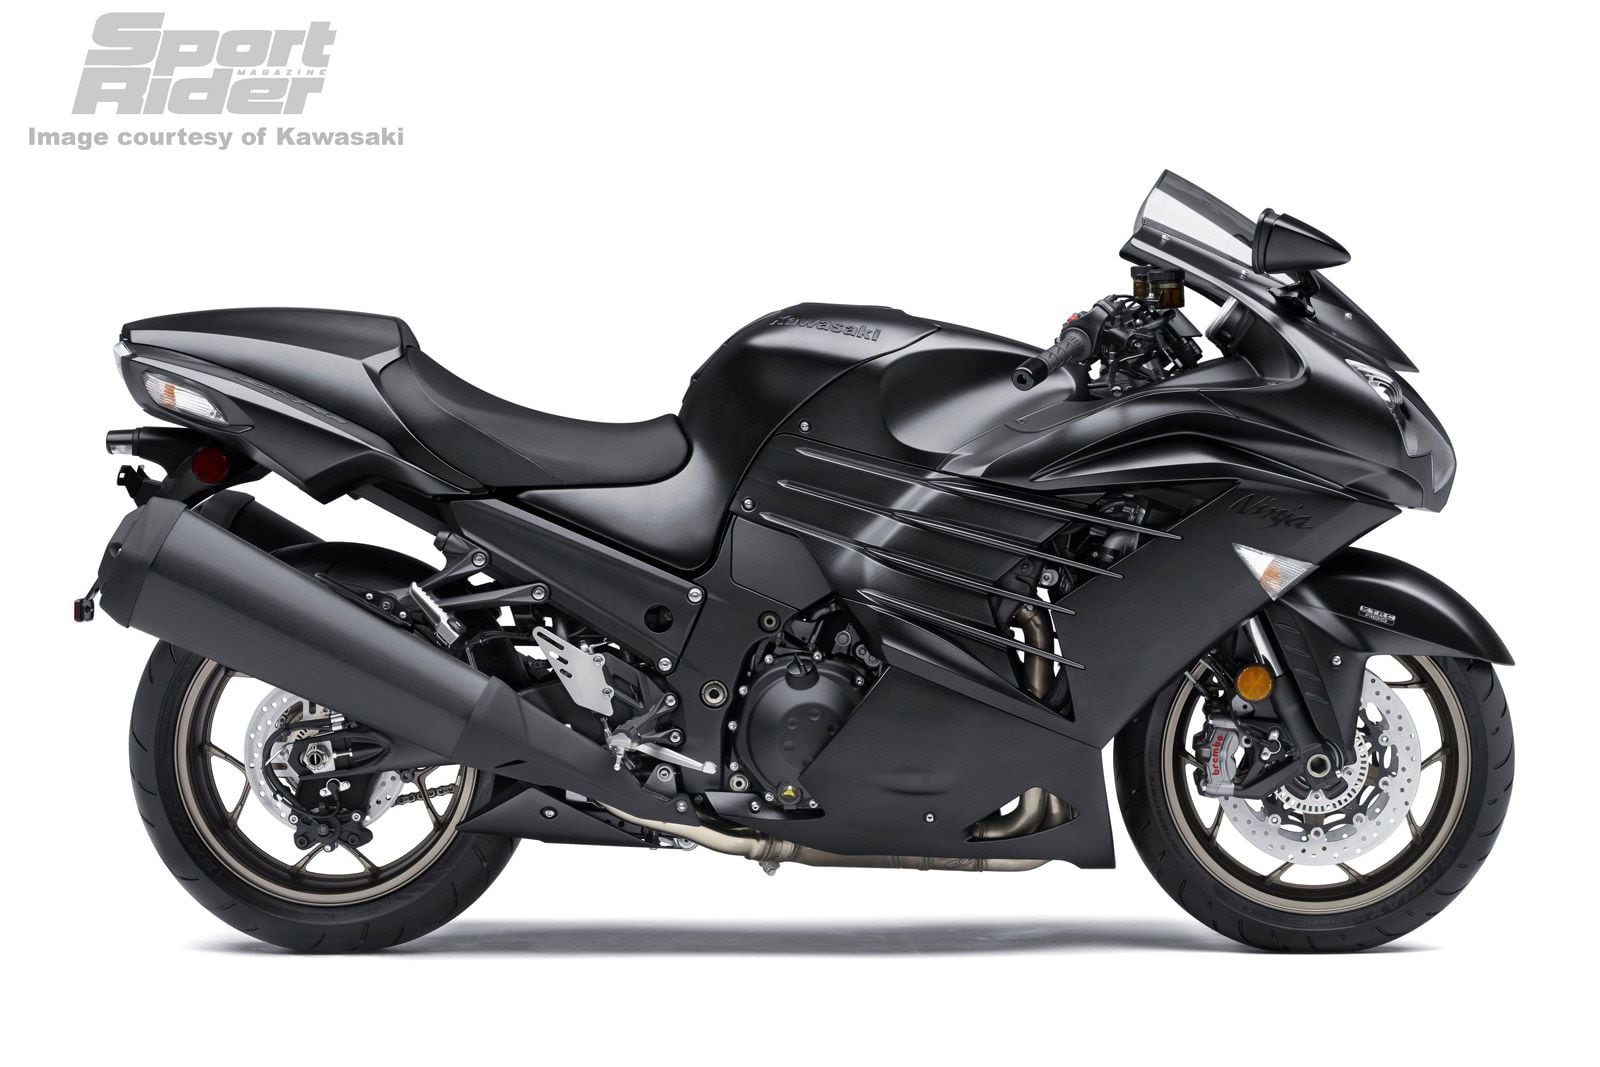 2016 Kawasaki ZX-14R ABS and Special Edition First Look | Cycle World